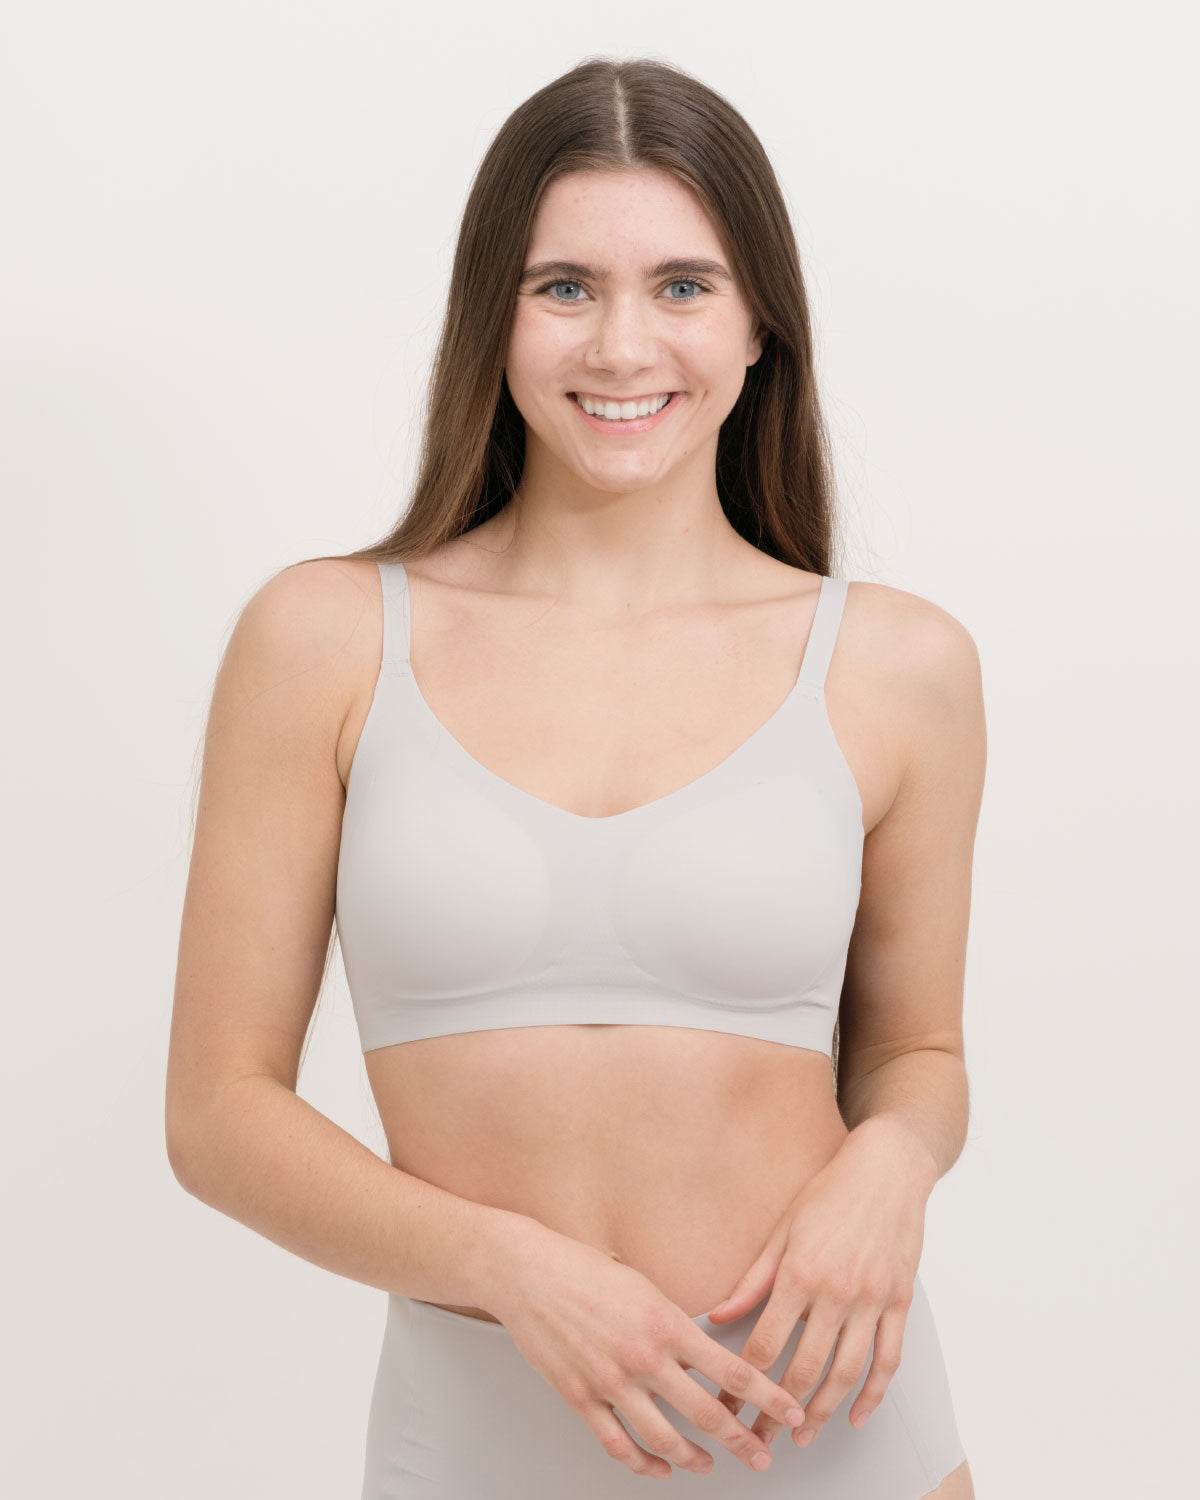 How To Hide Nipples In Non-Padded Bras?